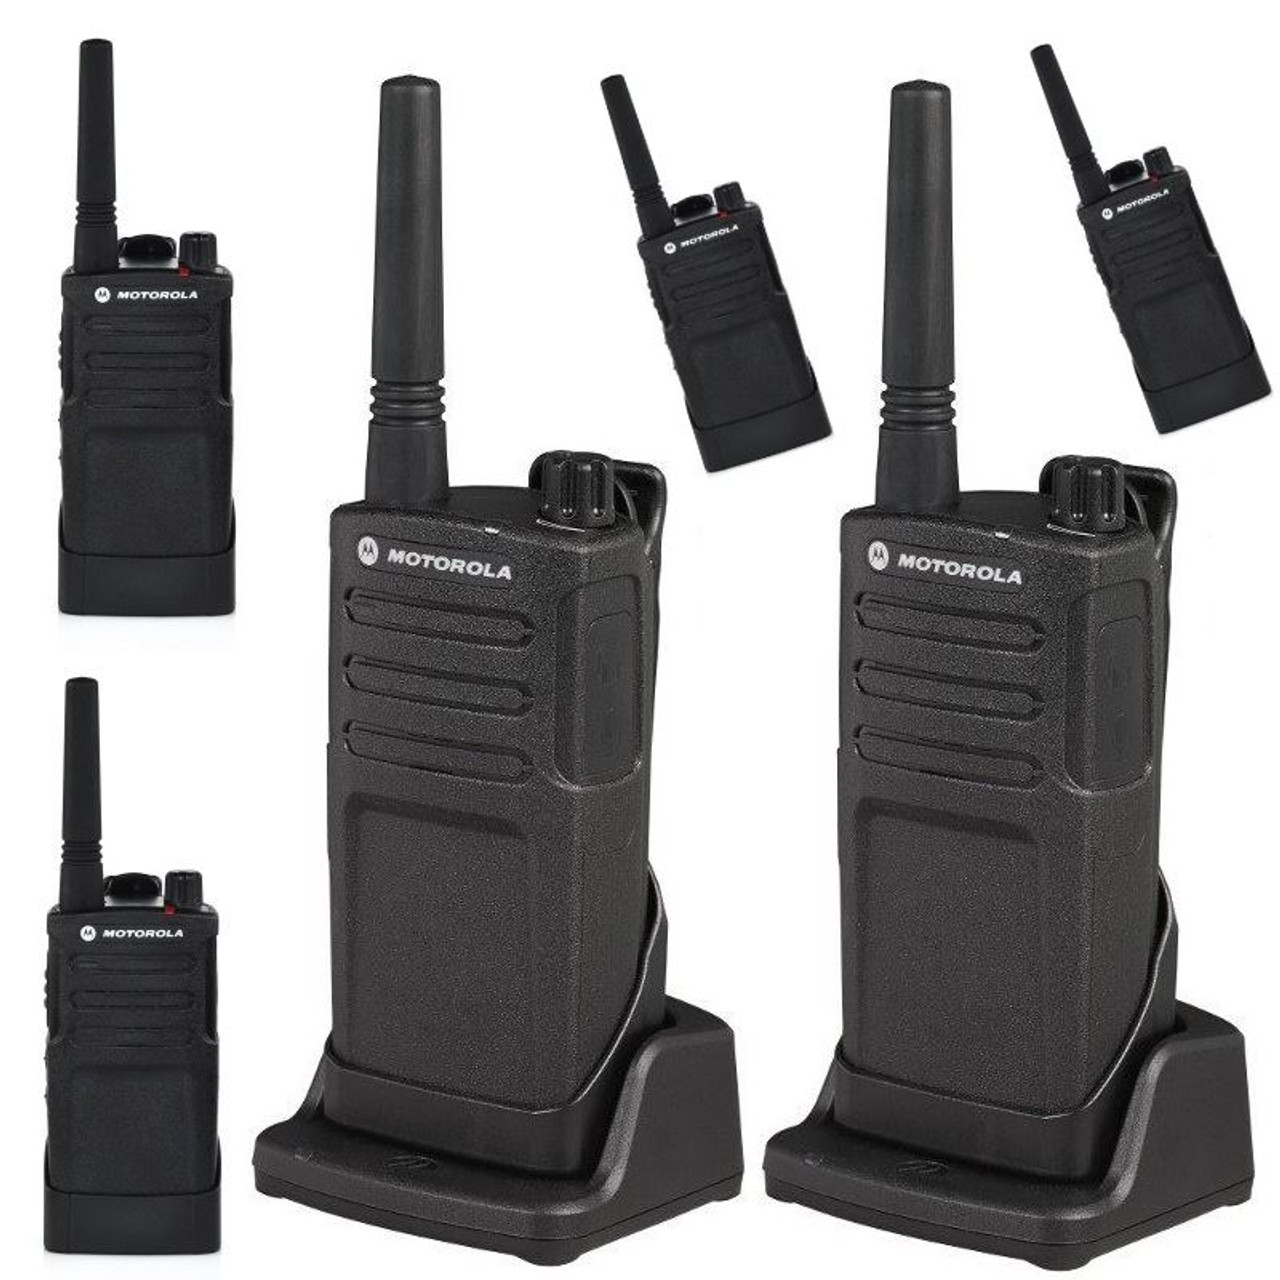 No FCC License required on this Six Pack of VHF outdoor Motorola RMM2050  Watt MURS Business Radios that work great outdoors.